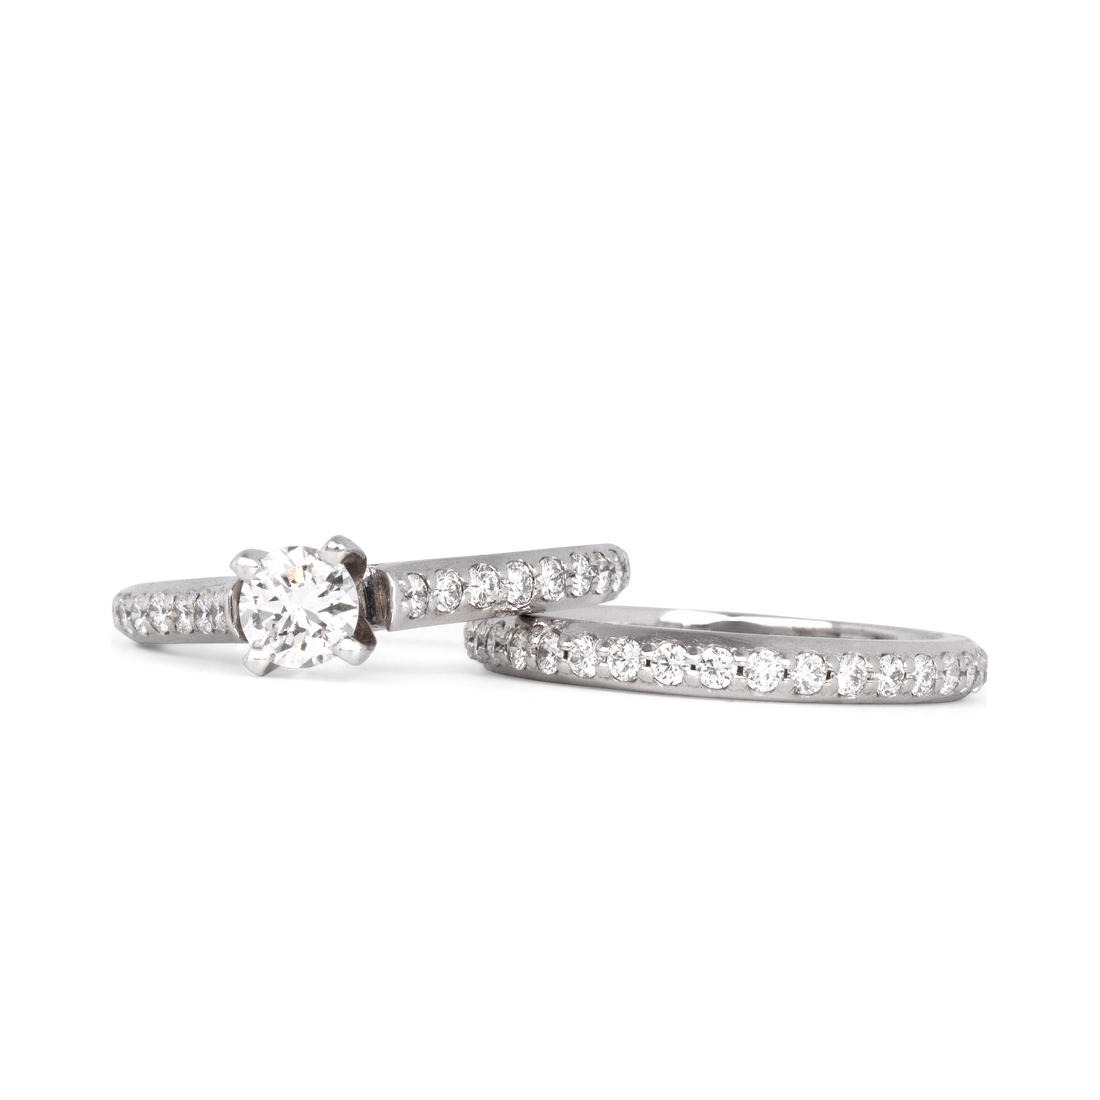 diamond ring and wedding band, complete wedding ring sets